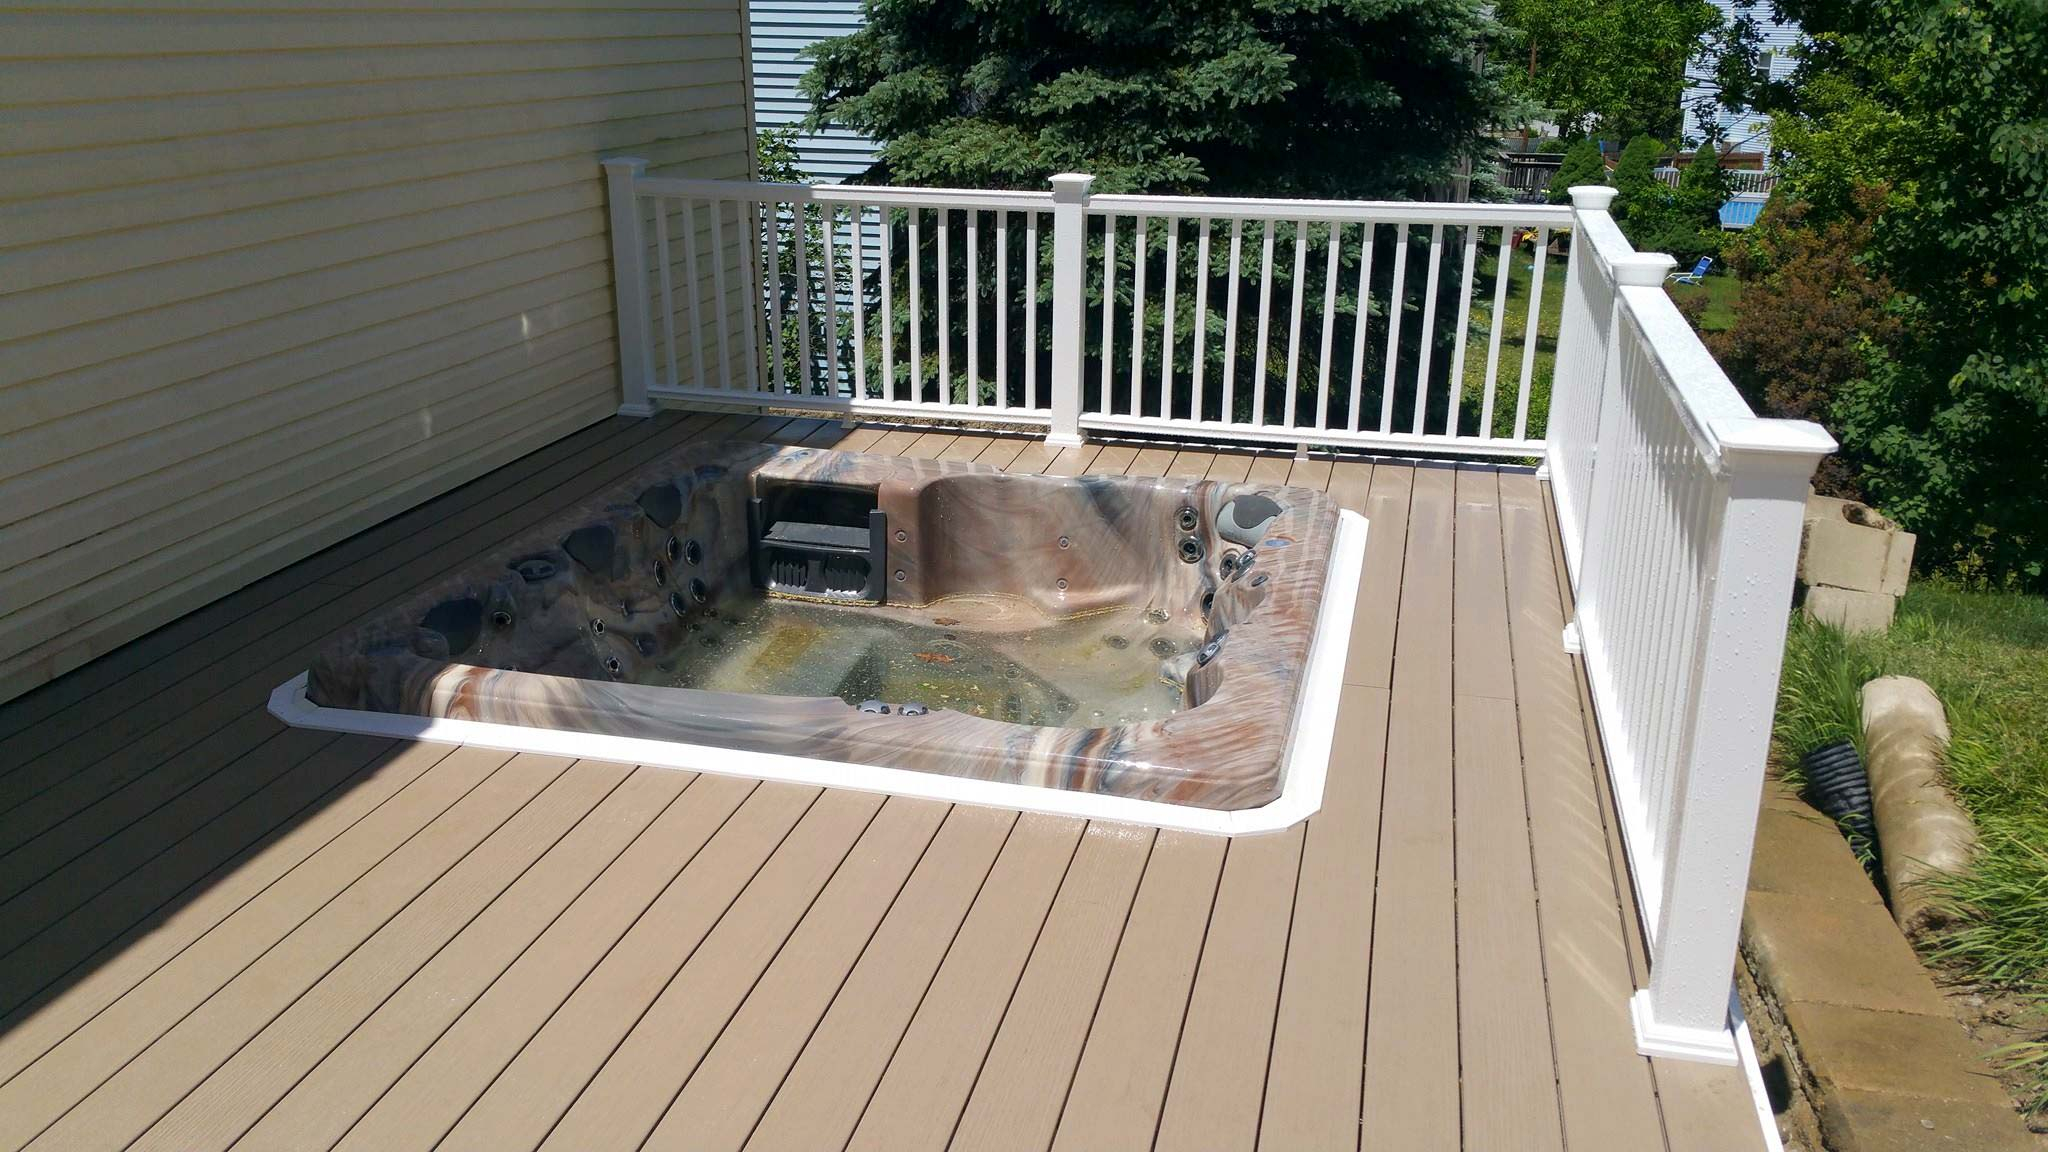 Hot Tubs Built Into Decks Gy02 Roccommunity intended for size 2048 X 1152